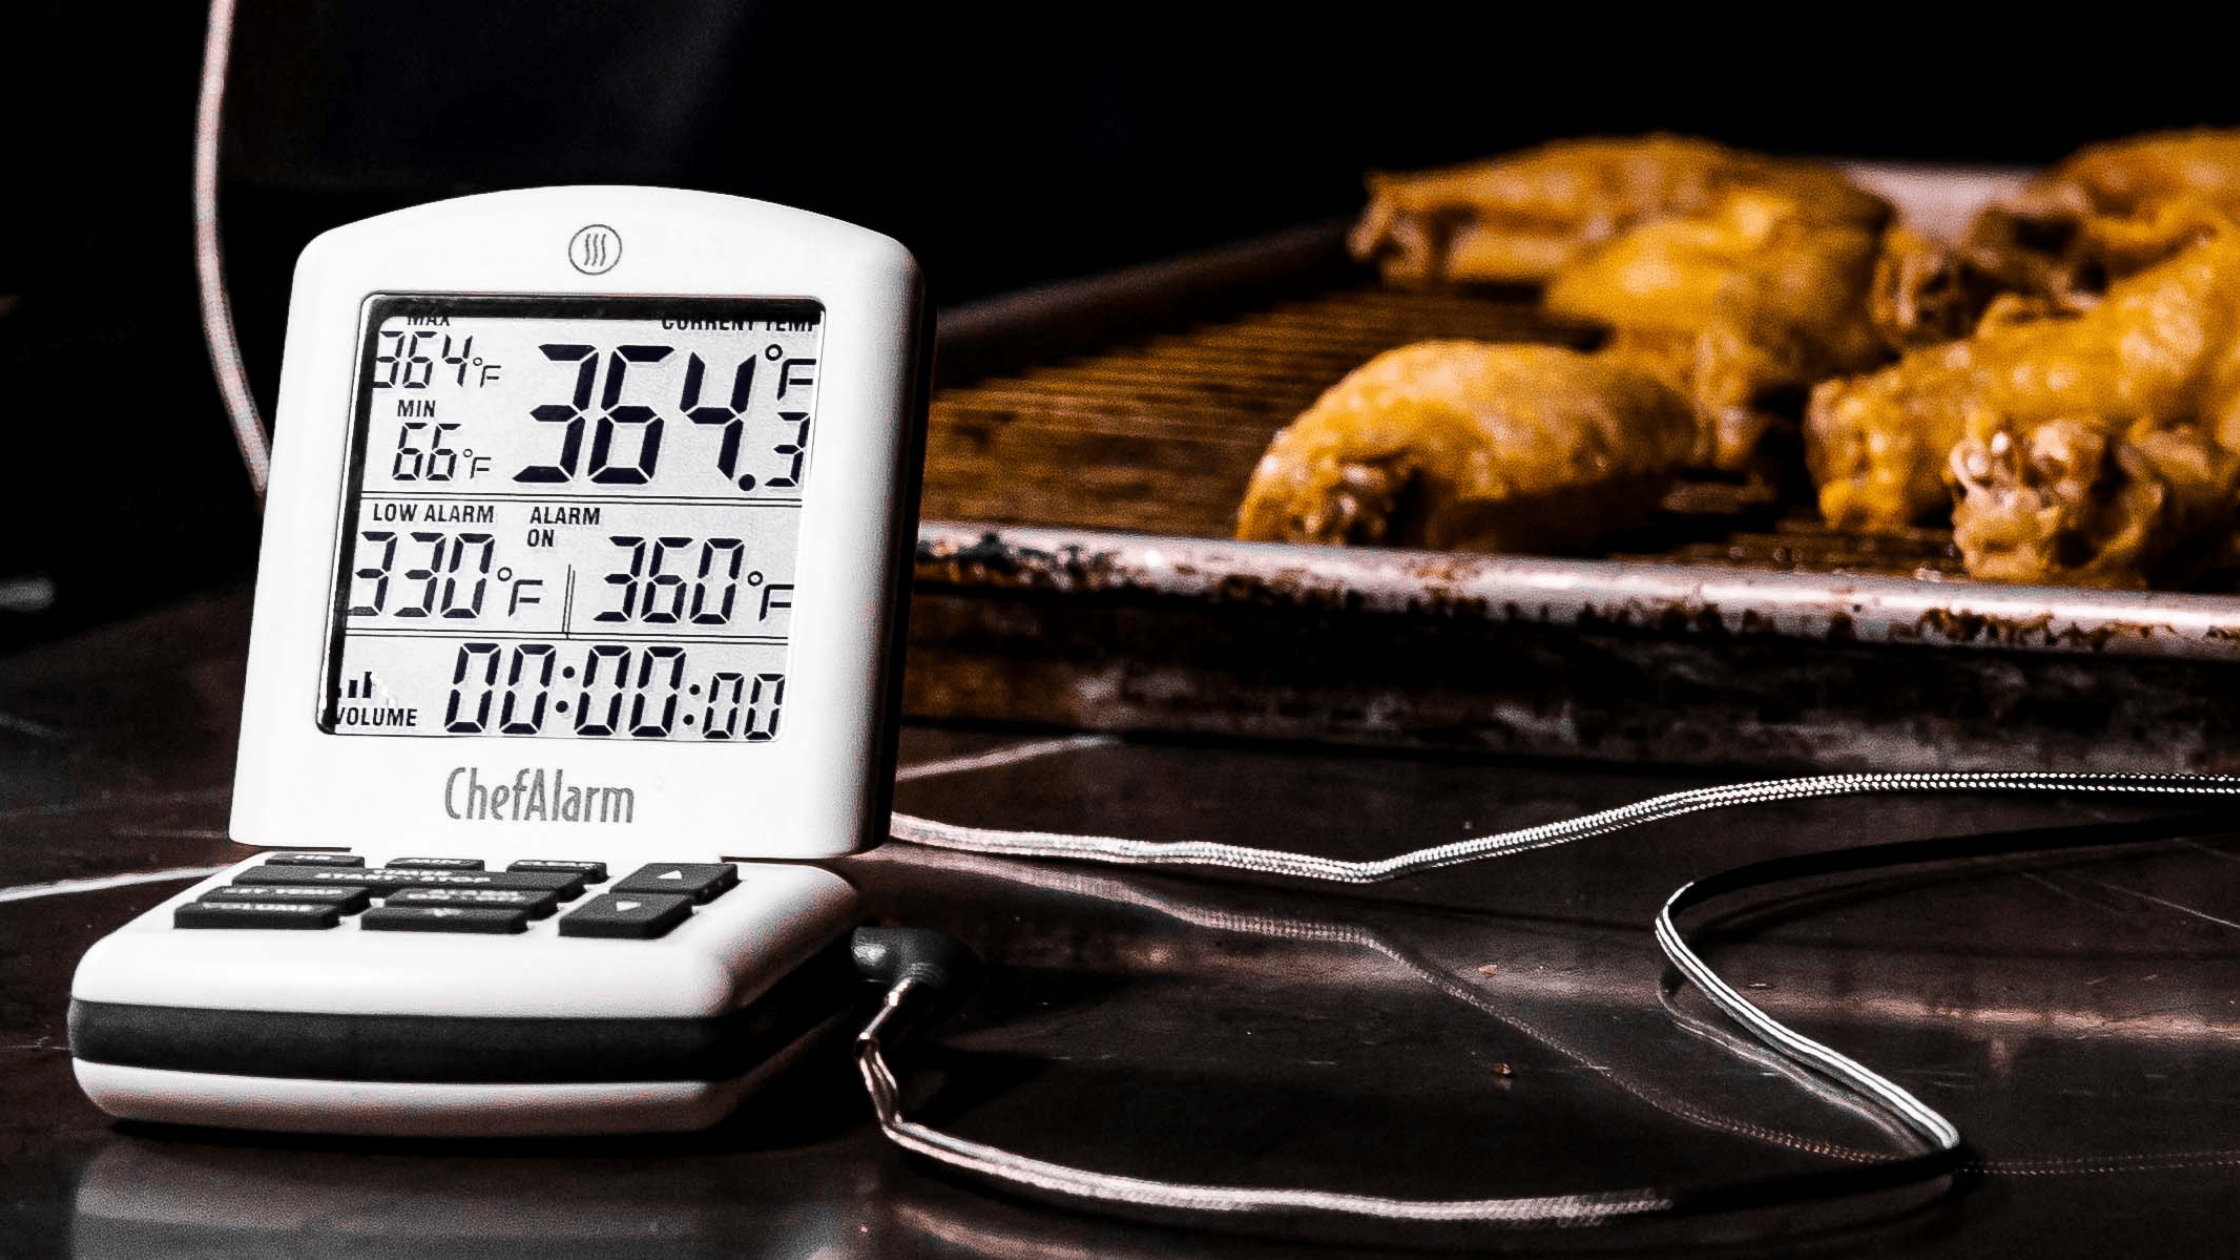 ThermoWorks ChefAlarm Cooking Thermometer